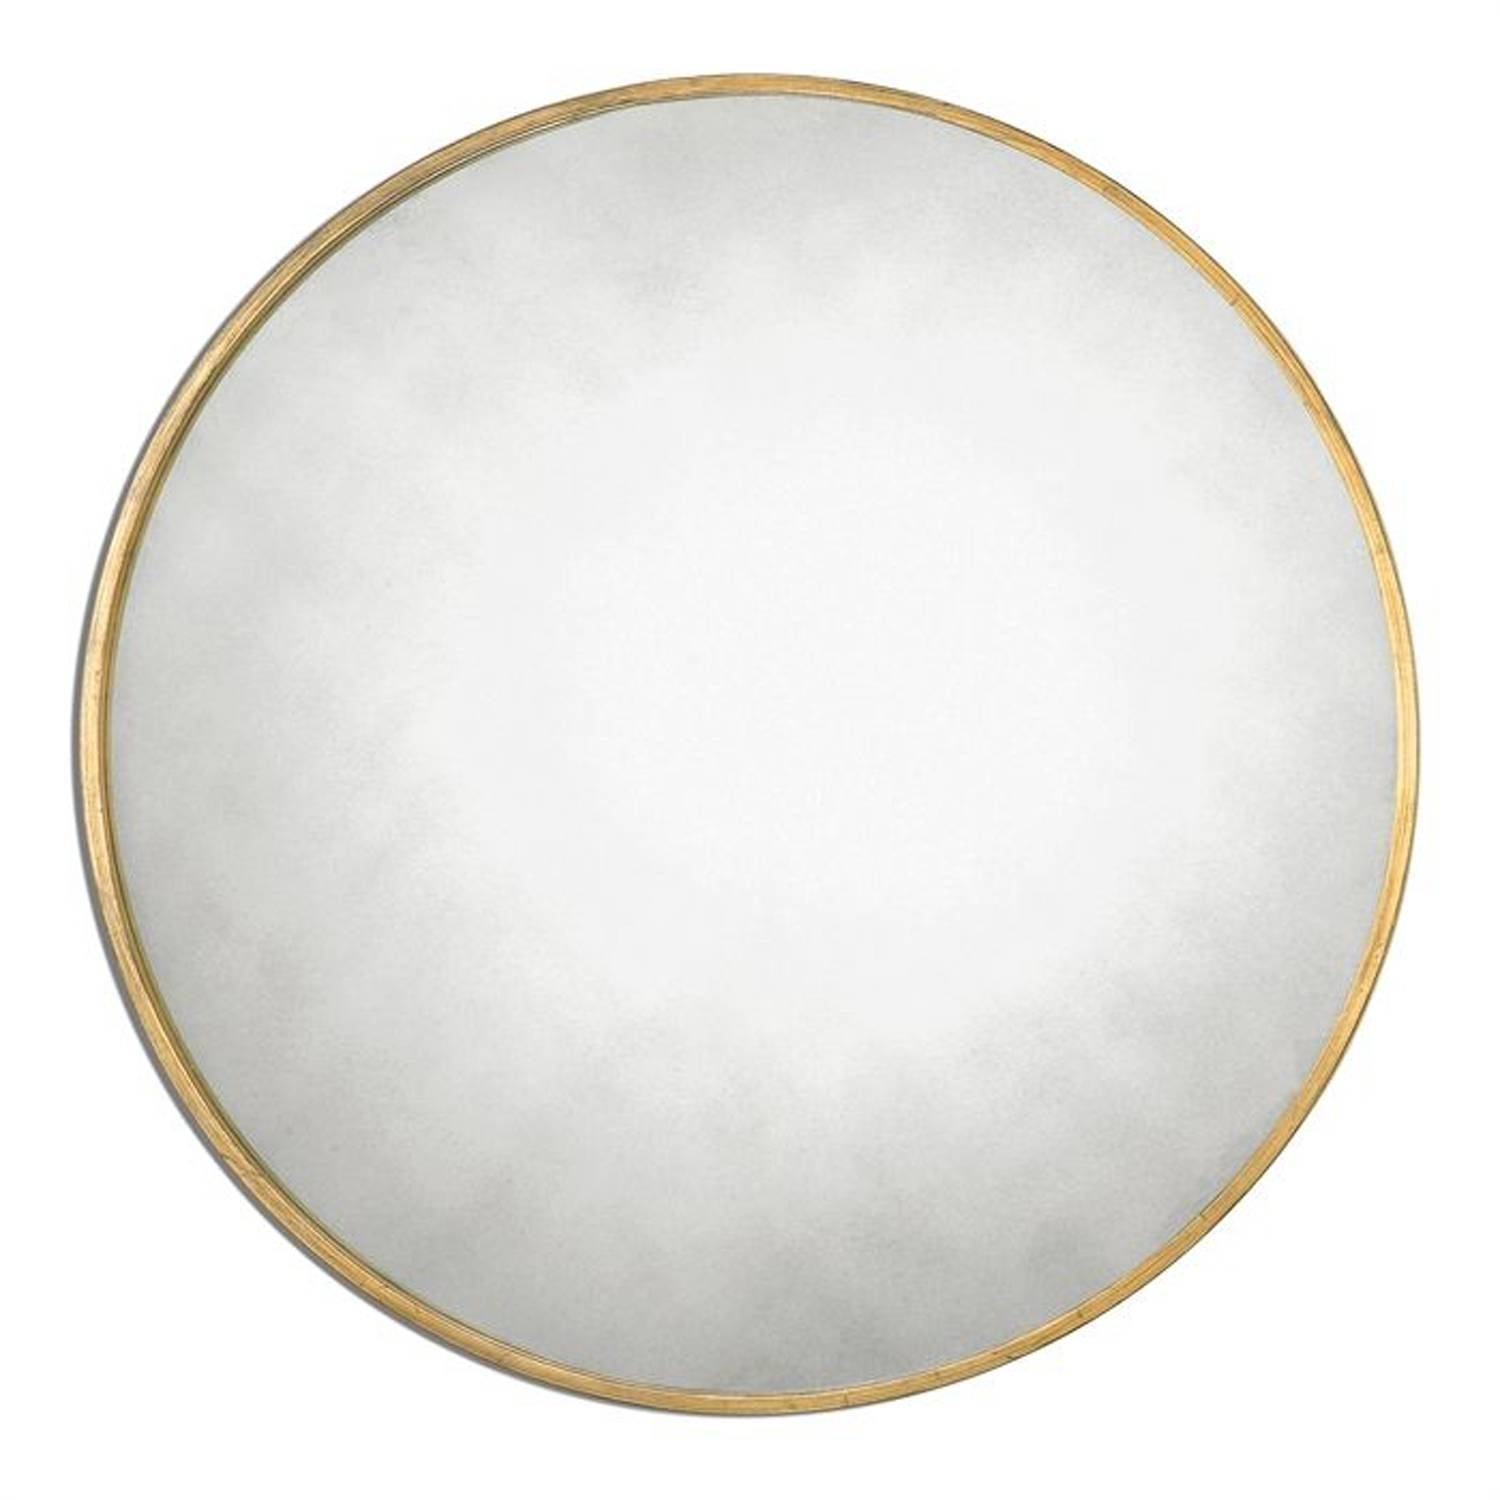 Wall Mirrors, Bathroom Mirrors | Bellacor For Black Round Mirrors (View 14 of 25)